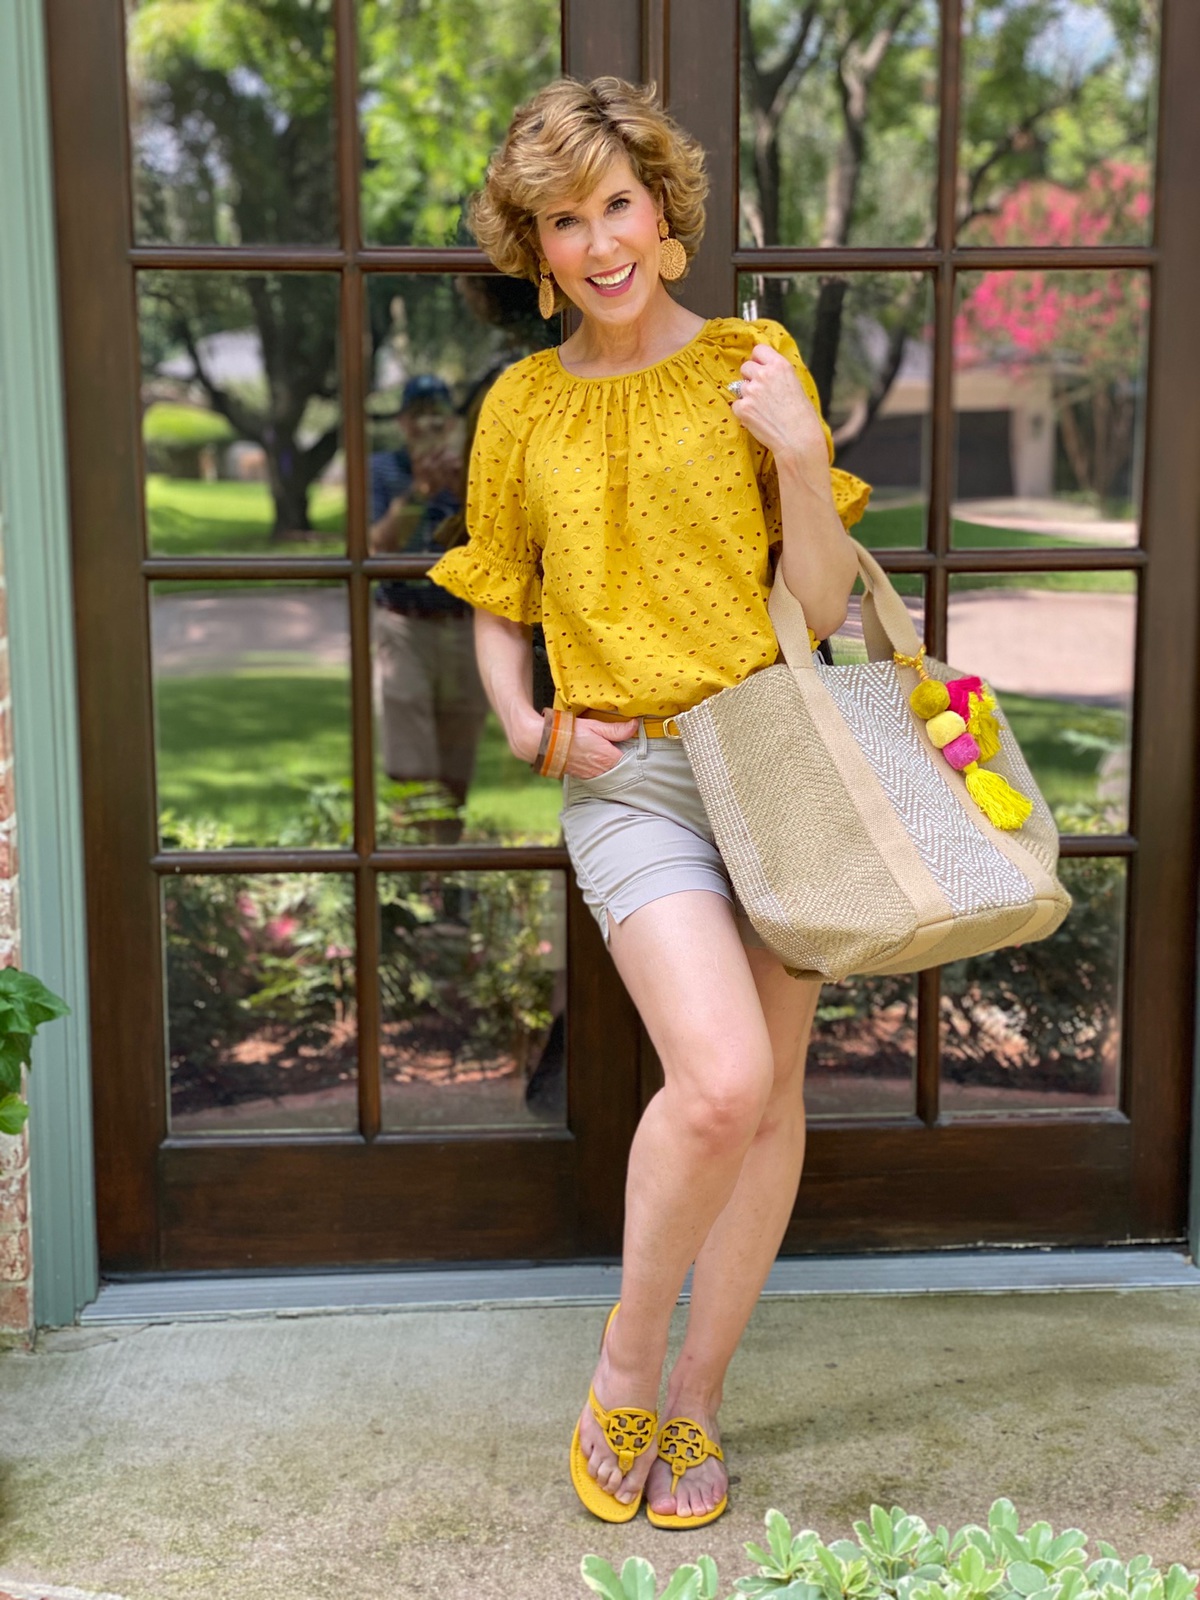 woman dressed in yellow eyelet top and tan shorts carrying burlap tote with tassels standing on porch in front of french doors